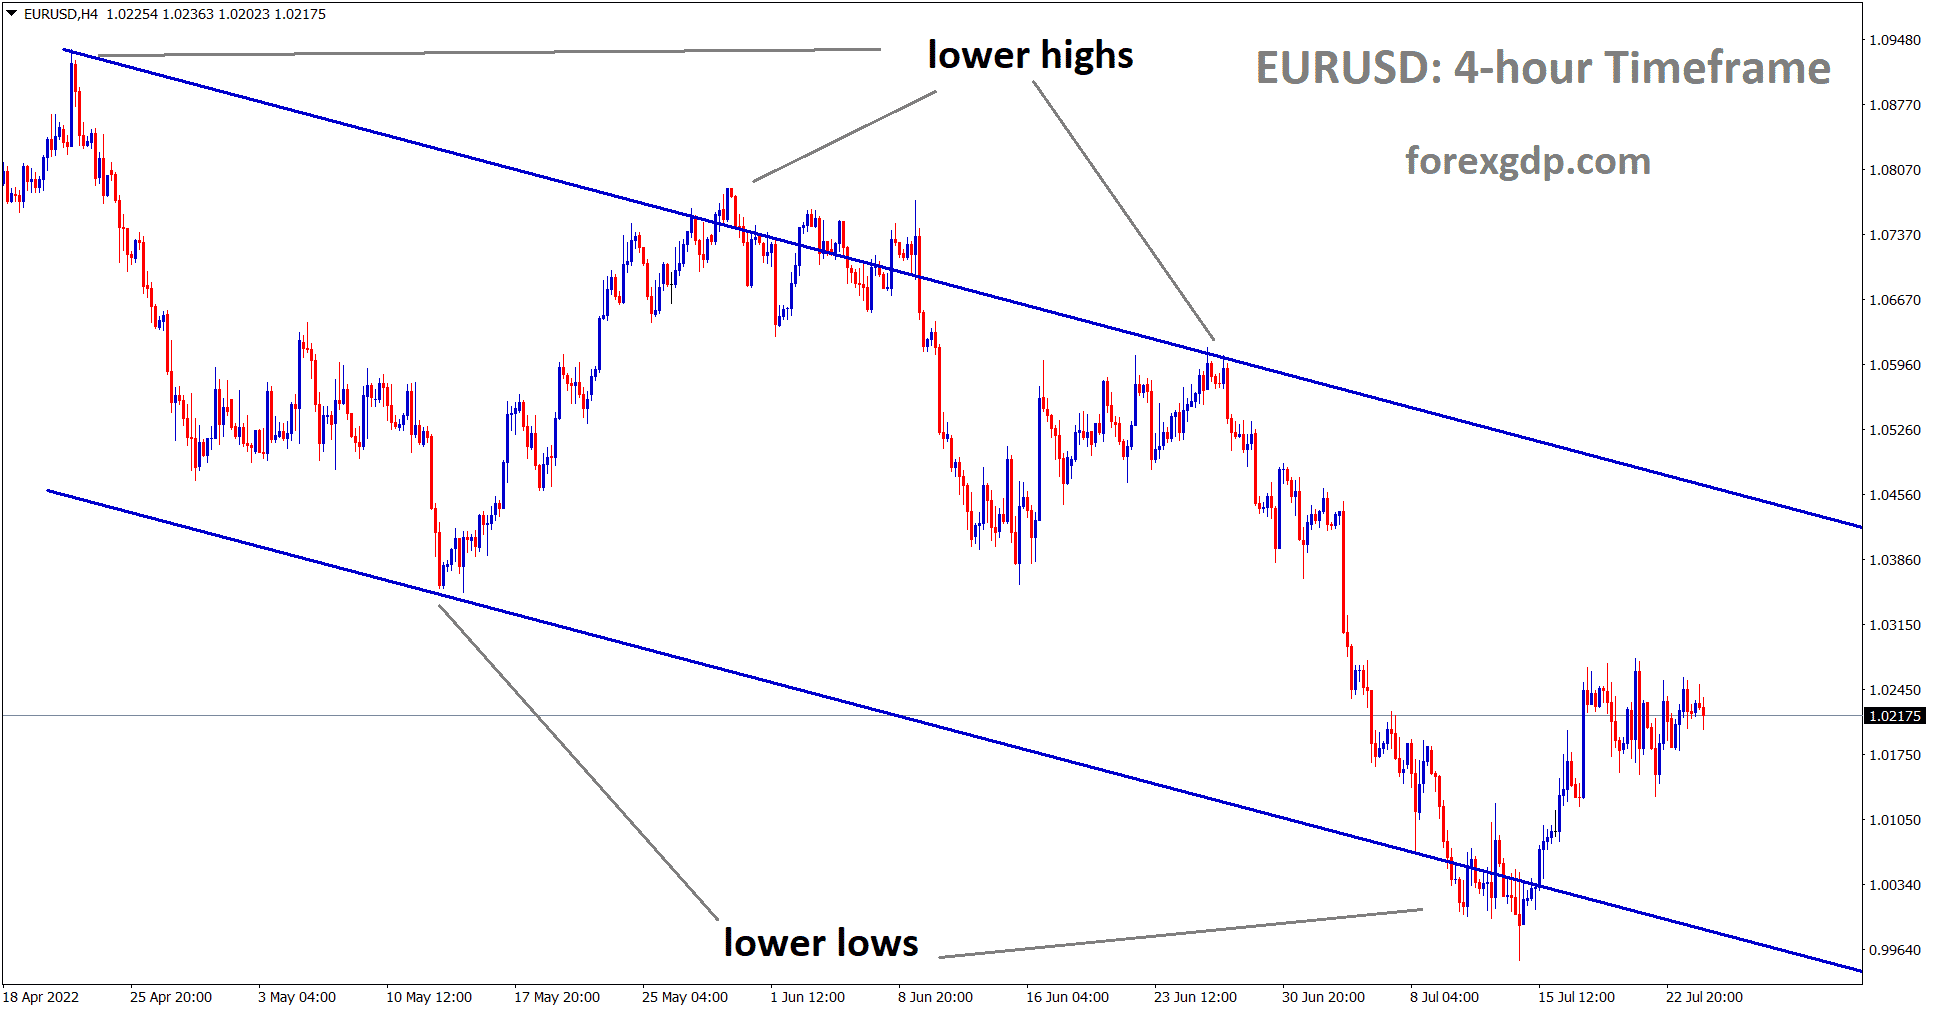 EURUSD H4 moving in descending channel and the market has rebounded from the lower low area of the channel.